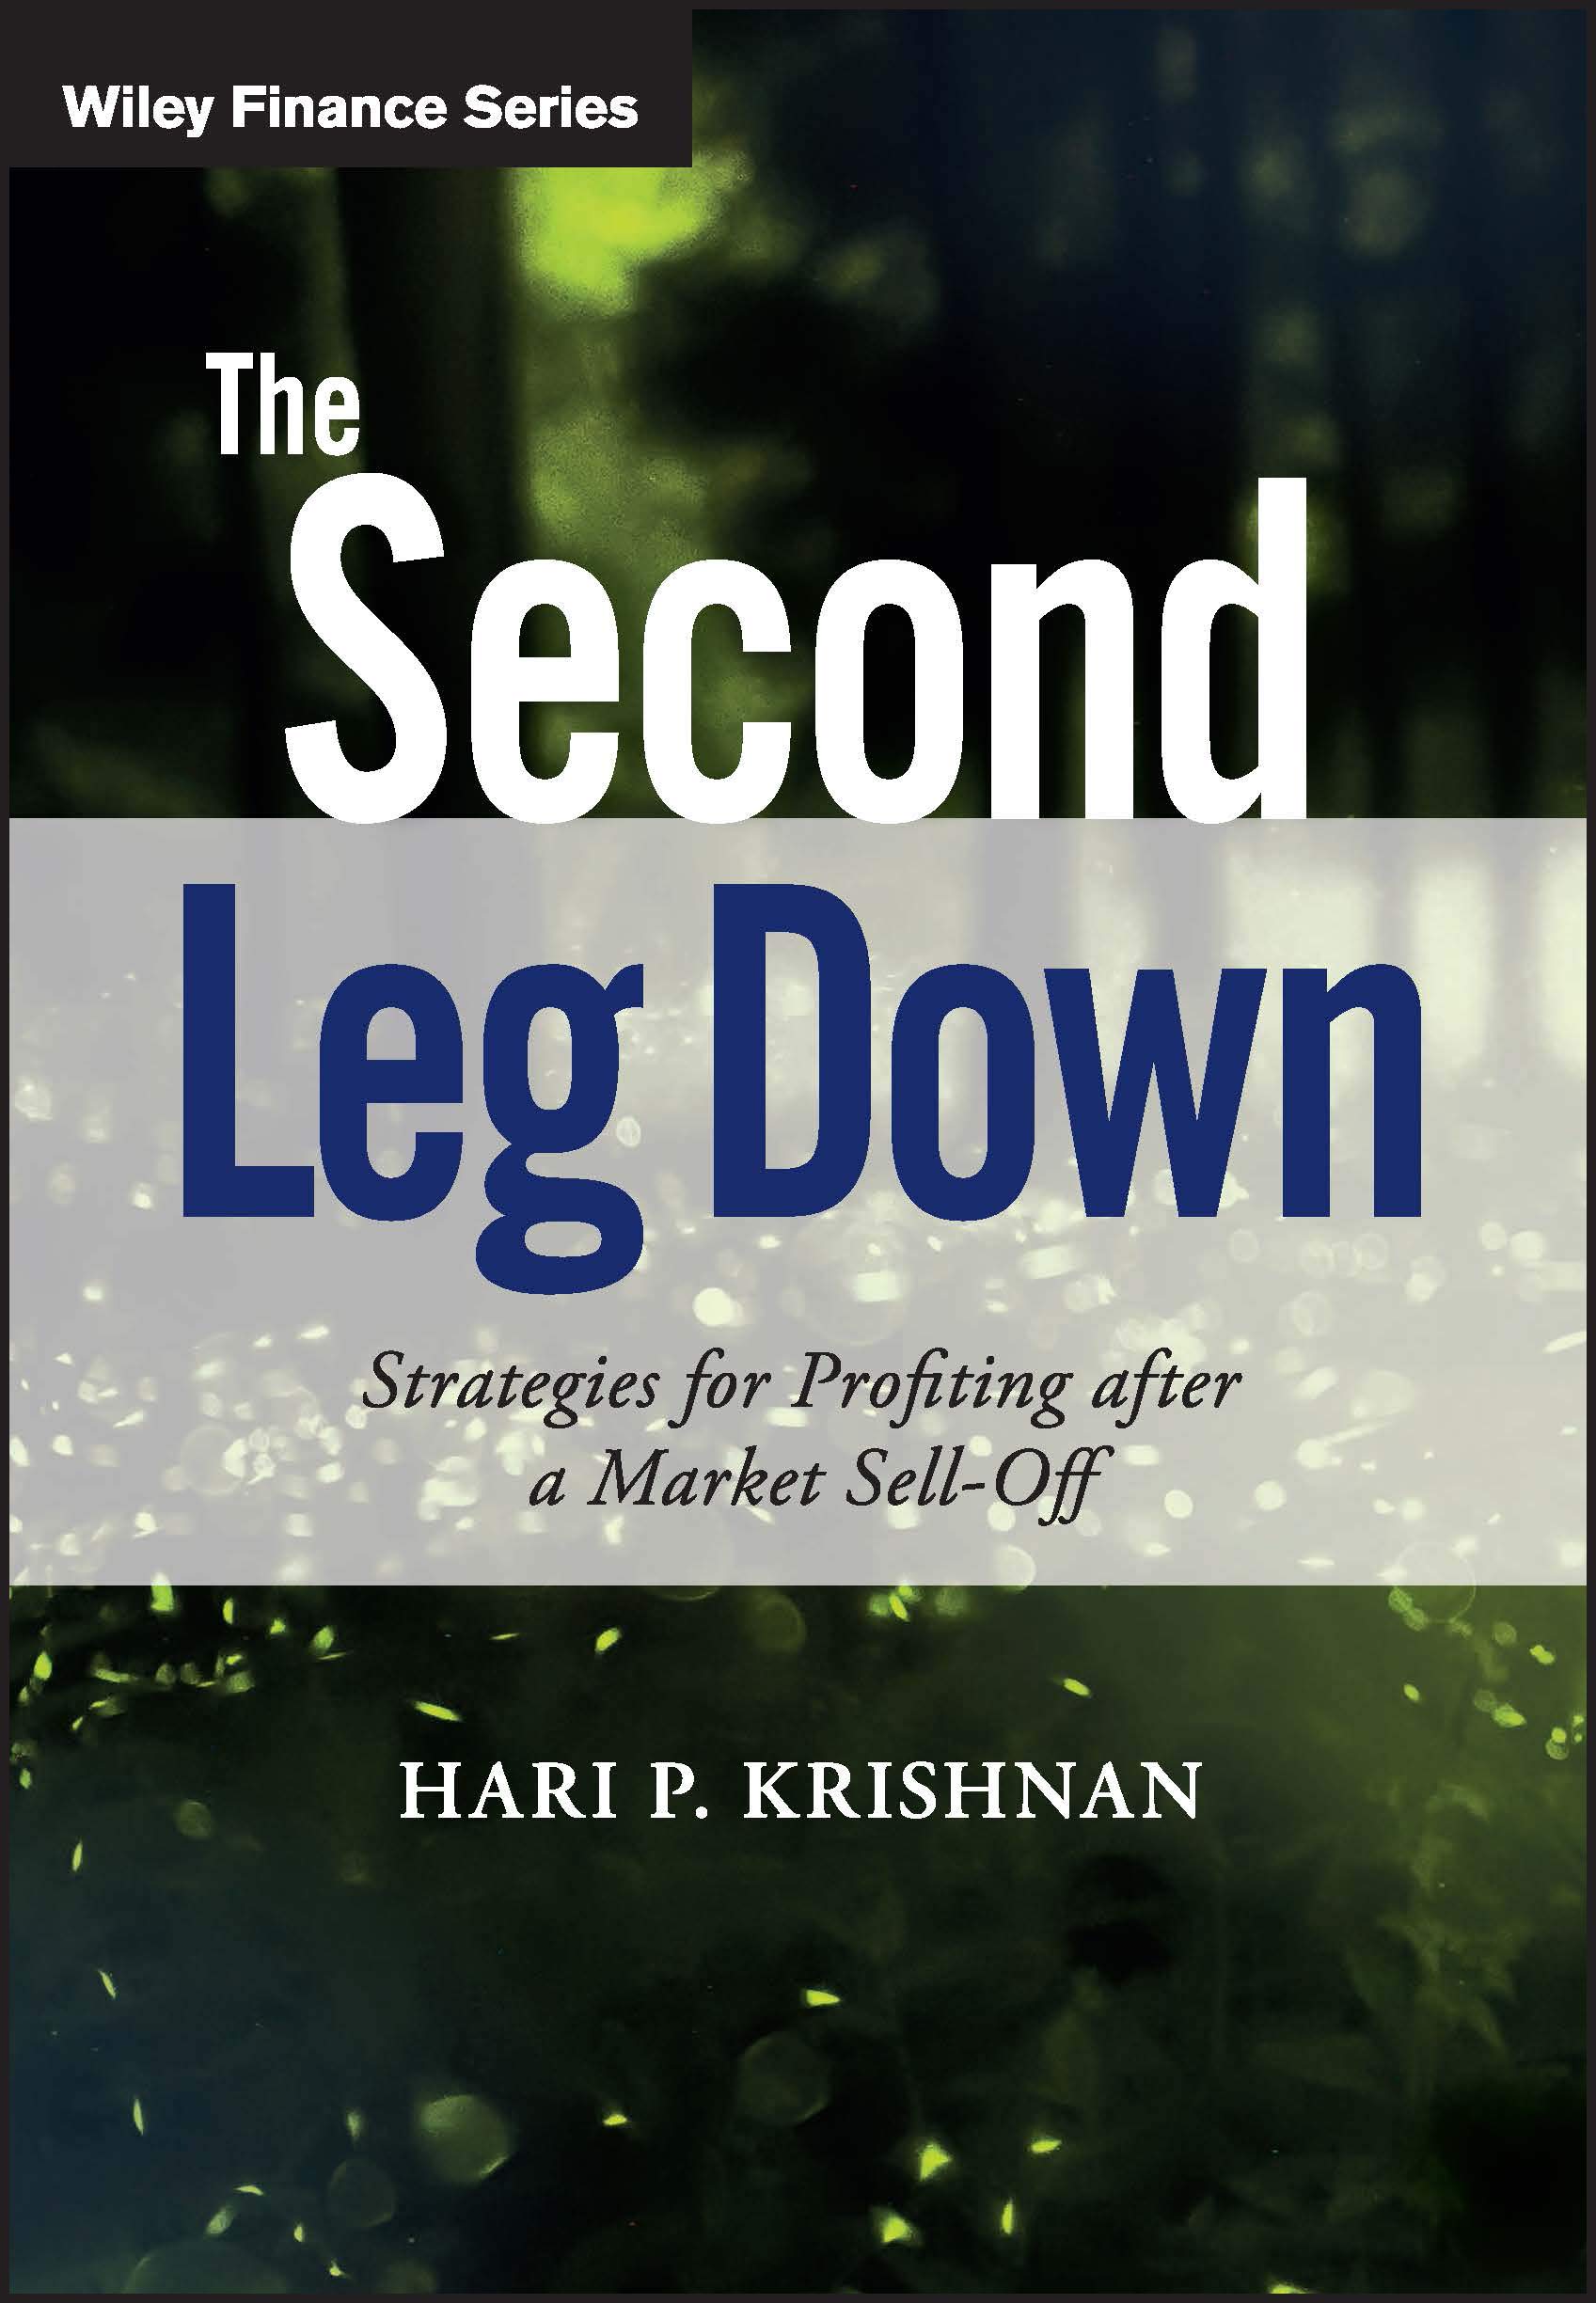 The Second Leg Down: Strategies for Profiting after a Market Sell-Off (The Wiley Finance Series)